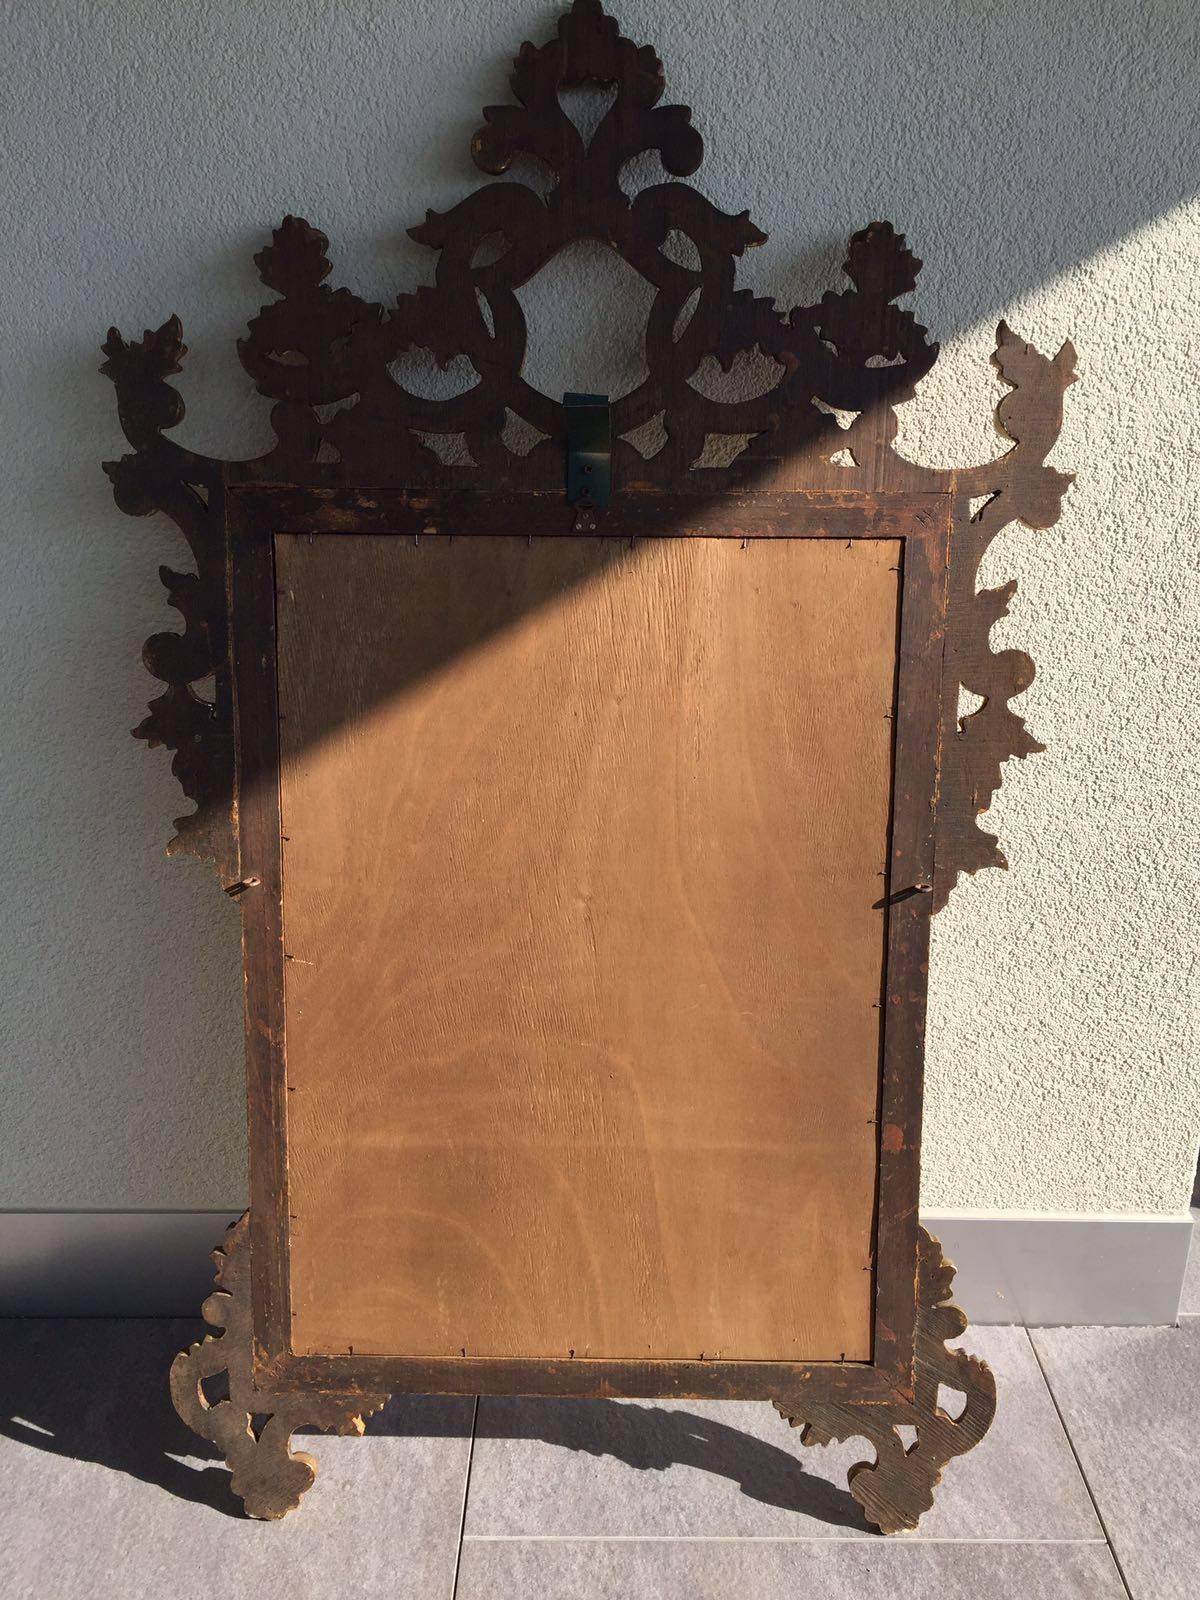 Beautiful Italian mirror with real wood.

Measures: H 132 cm x L 80 P 3.5 cm (frame)
H 71.5cm, L 51 (mirror).